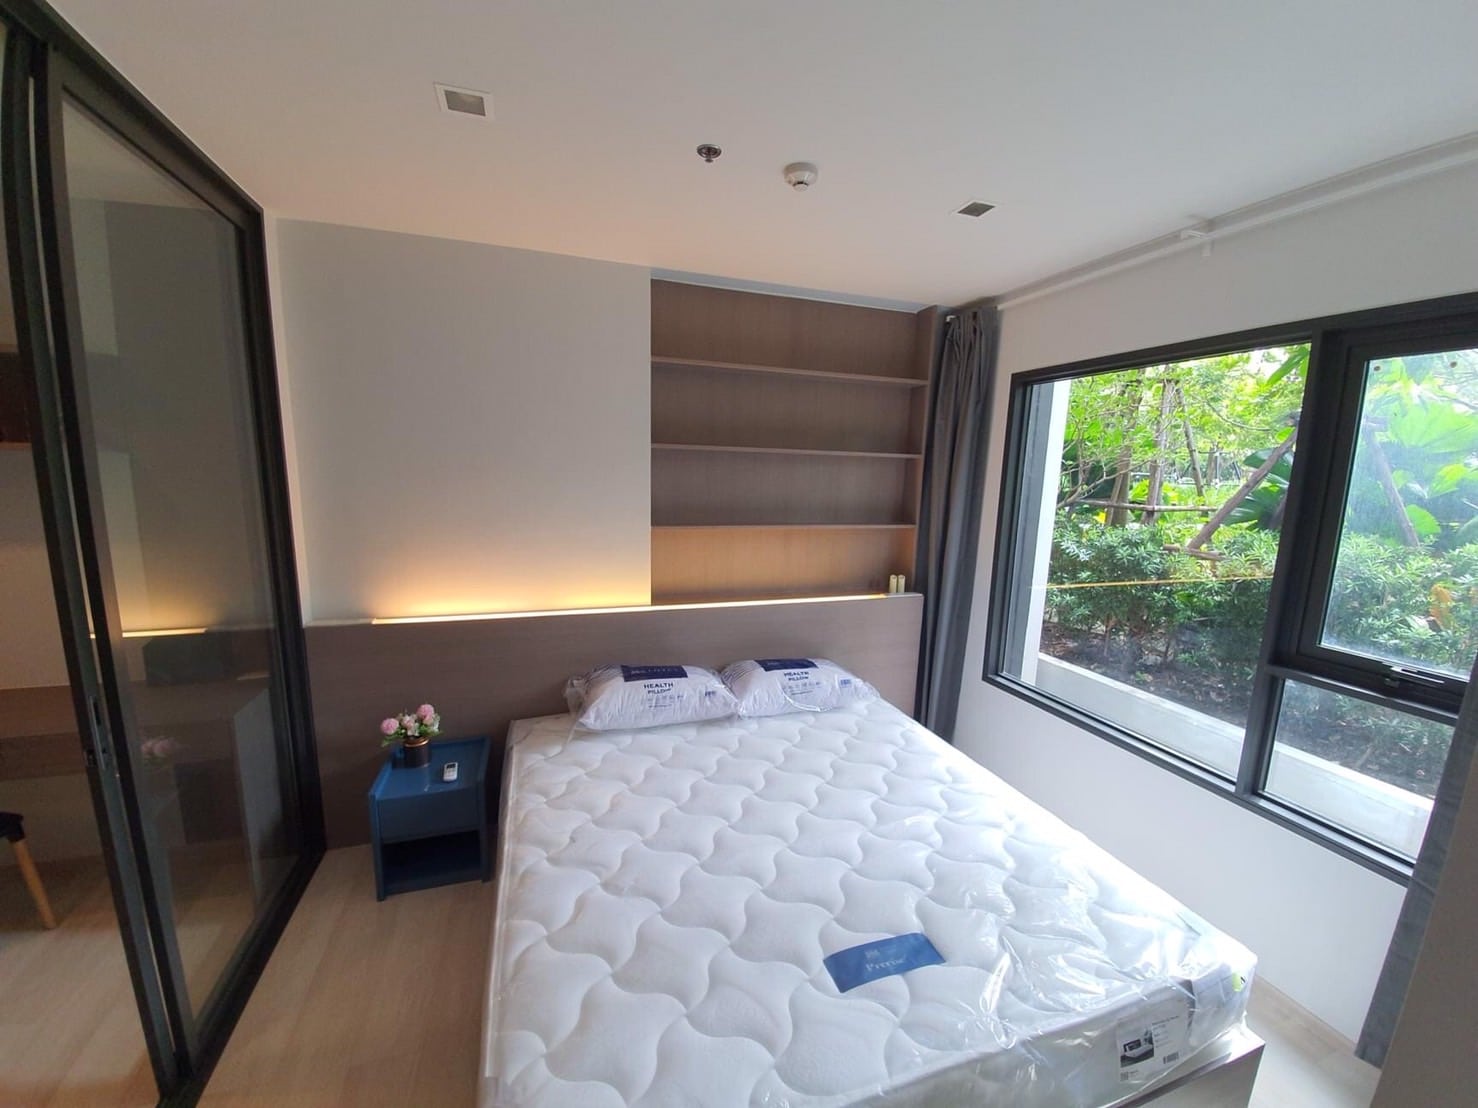 Life One Wireless for Rent – BTS Phloen Chit 600 meters – Unit 35 Sq.m.